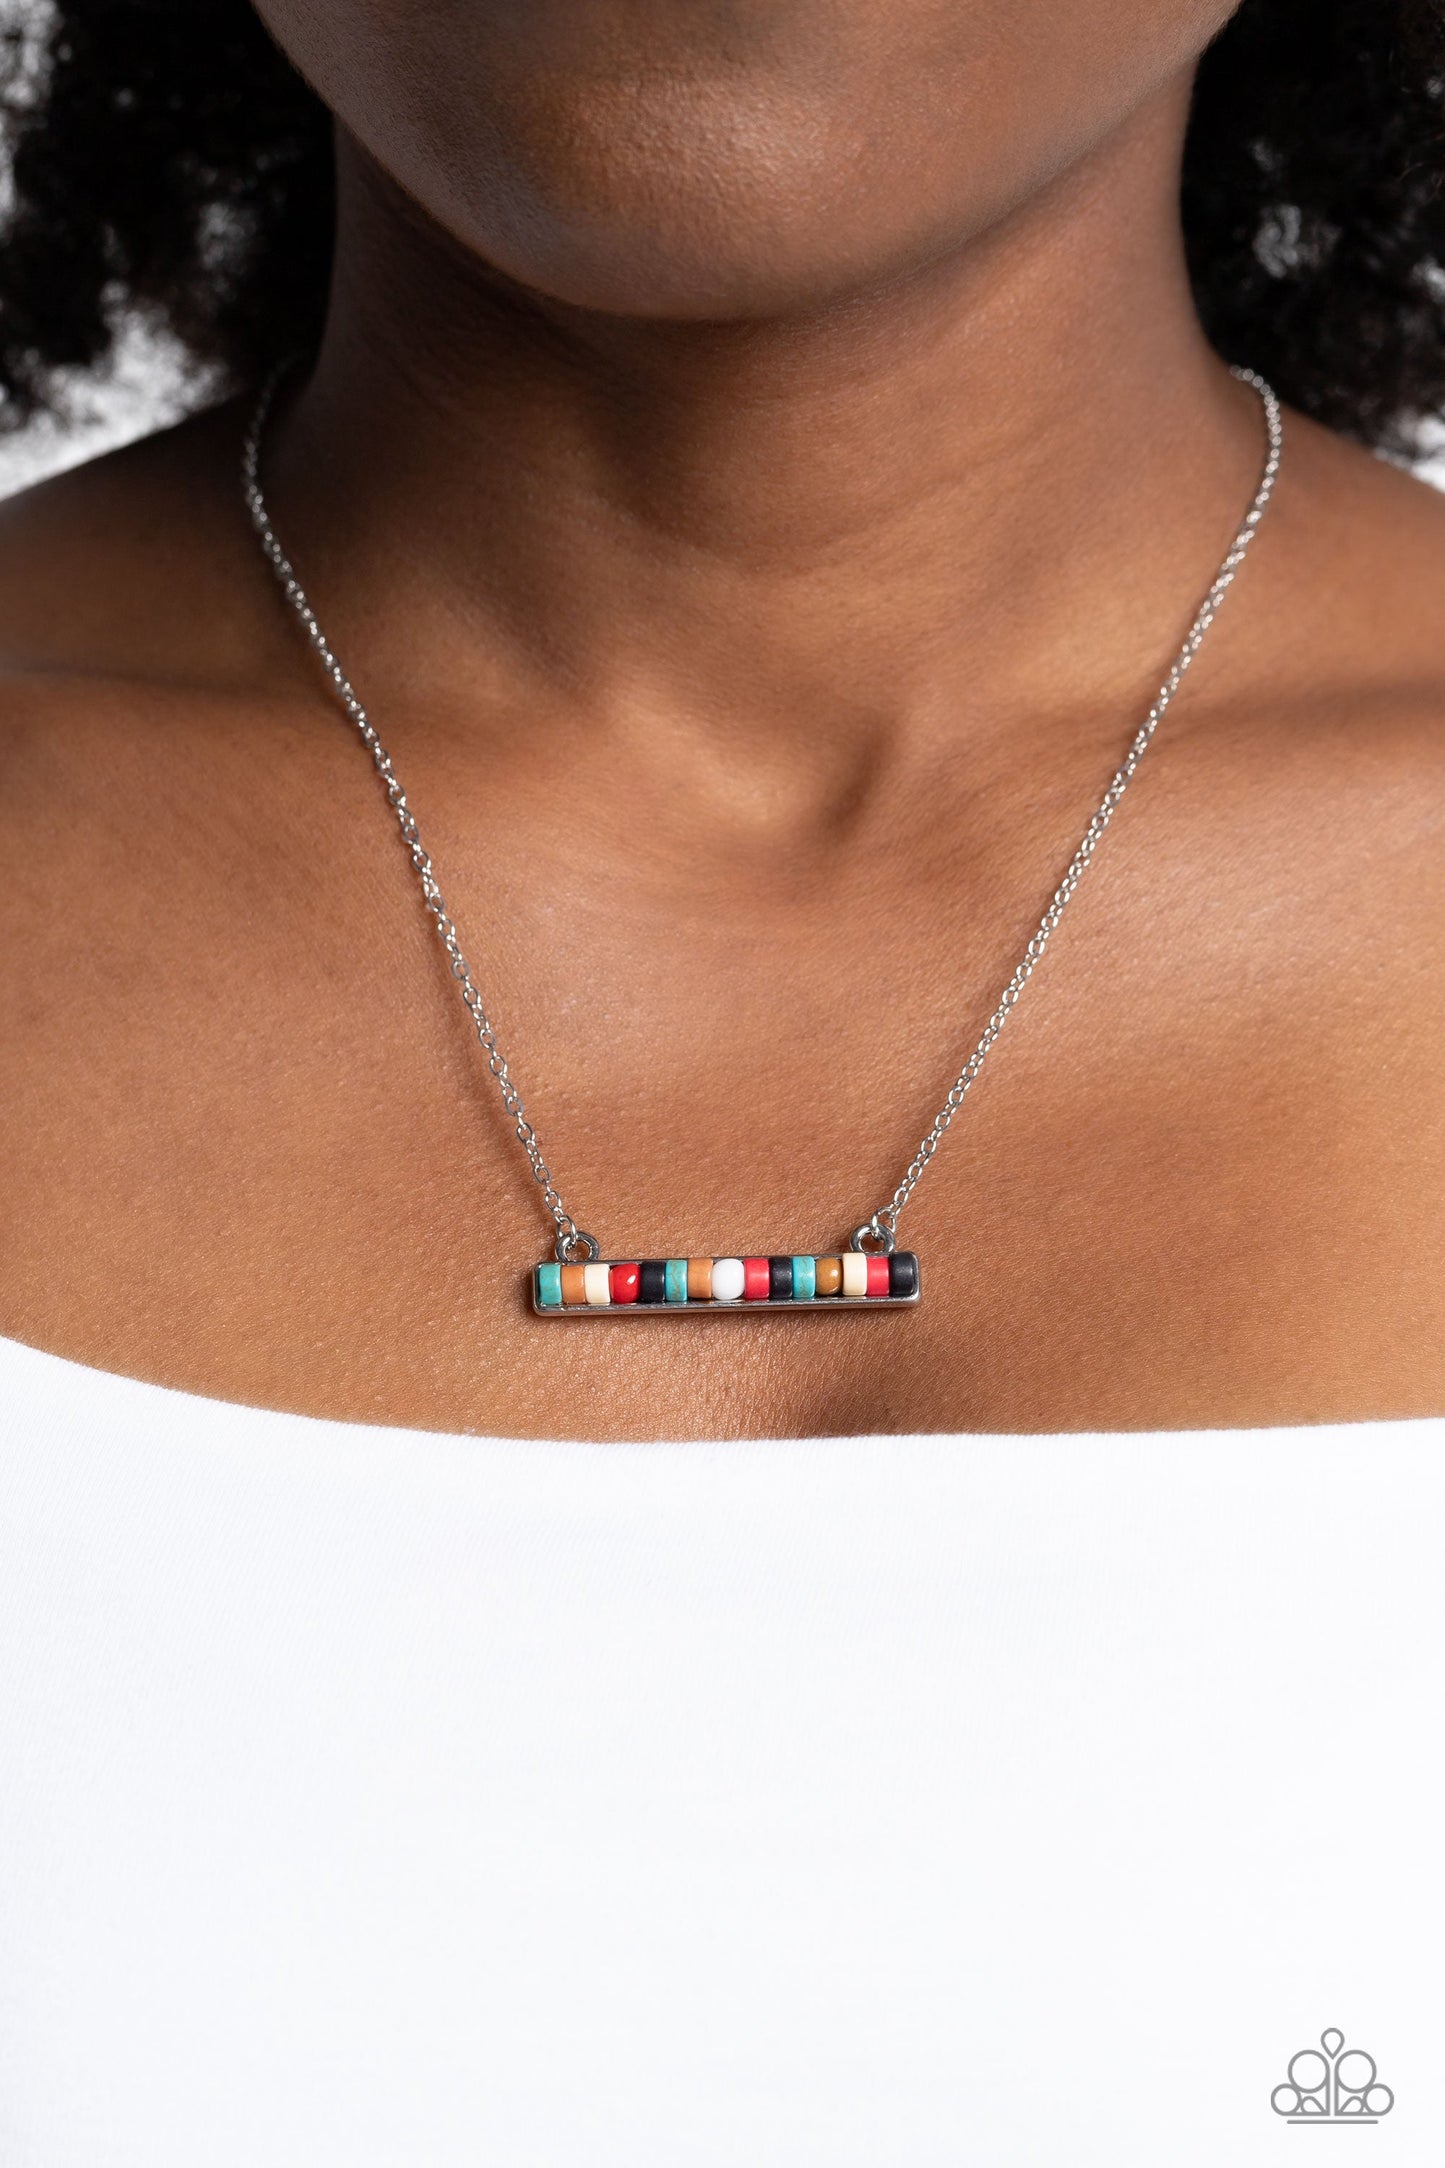 Barred Bohemian - Multi Colored Stone Disc Pendant Paparazzi Necklace & matching earrings